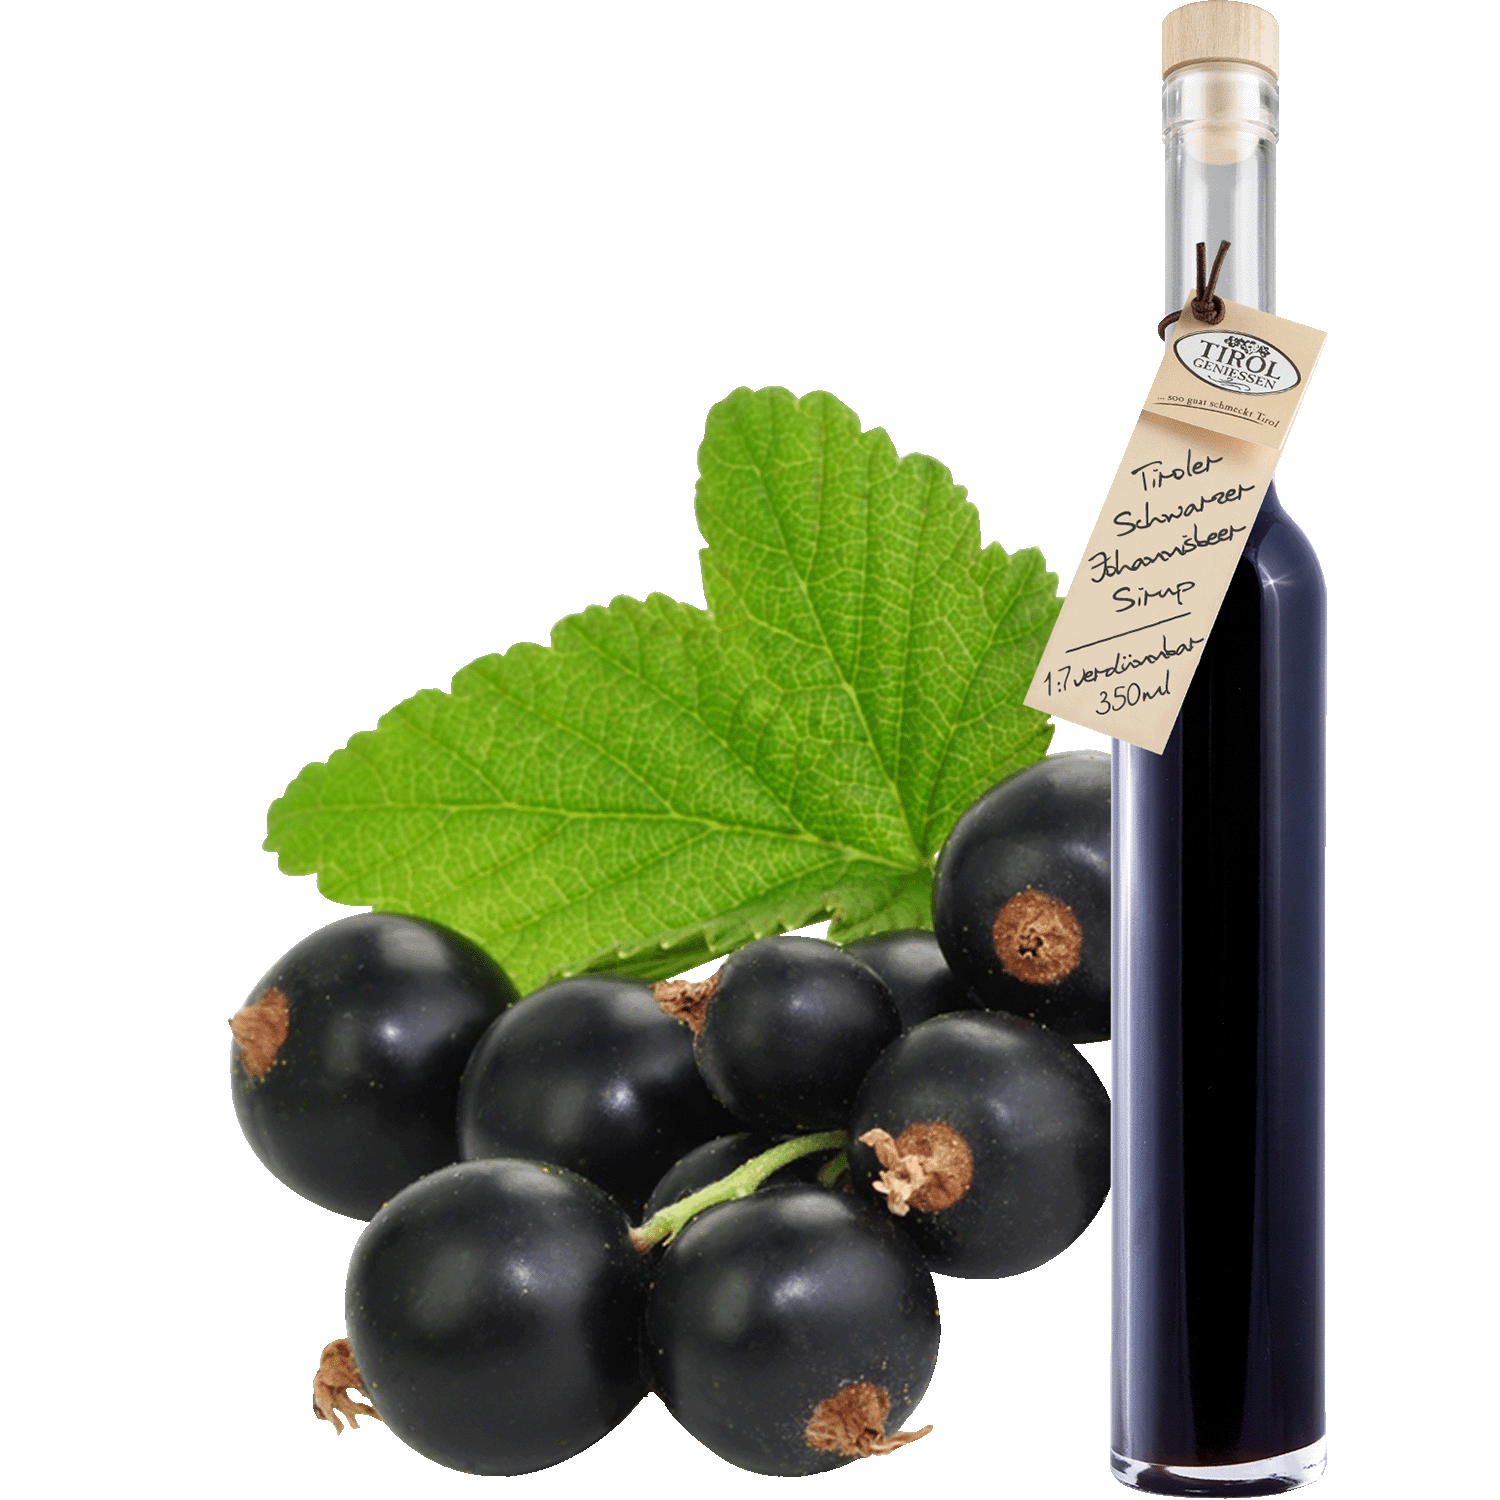 Black Currant Syrup in gift bottle from Austria from Tirol Geniessen